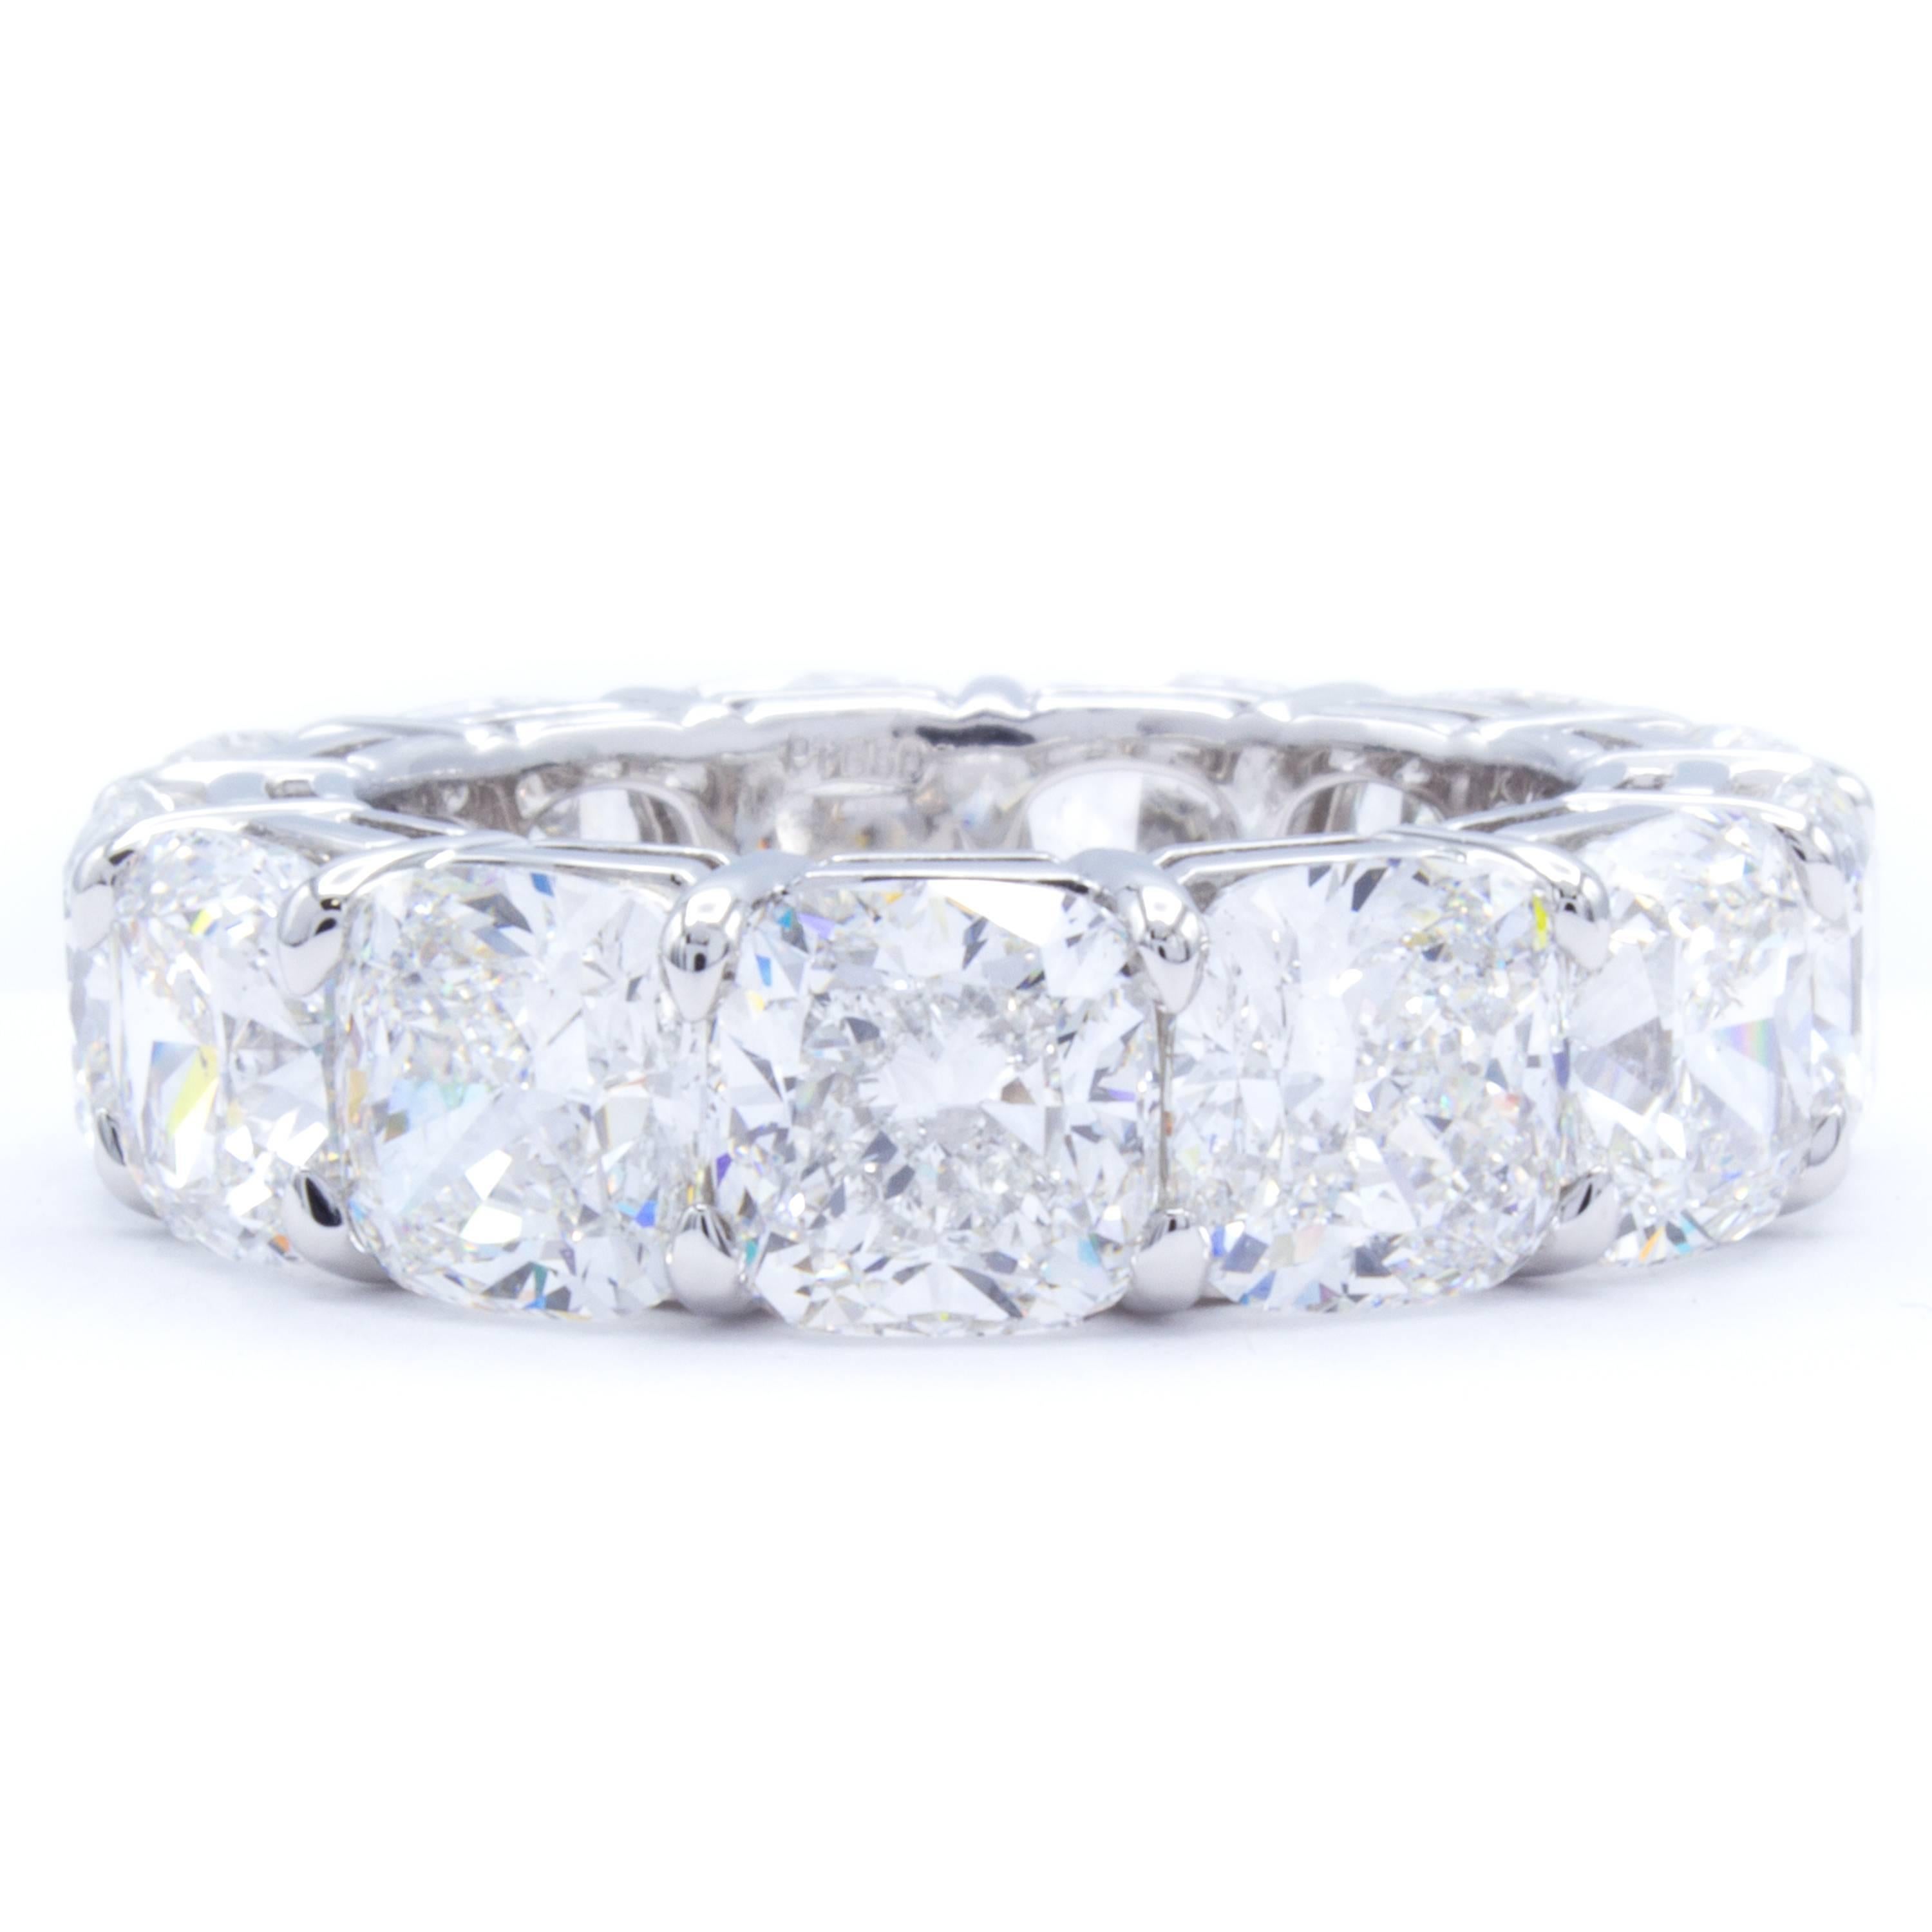 Perfection brought to life in another Rosenberg Diamonds & Co. masterpiece. 13 GIA certified cushion cut diamonds wrap around an eternity band of pure platinum. Totaling 13.25 carats, each stone has been hand selected by David Rosenberg to perfectly